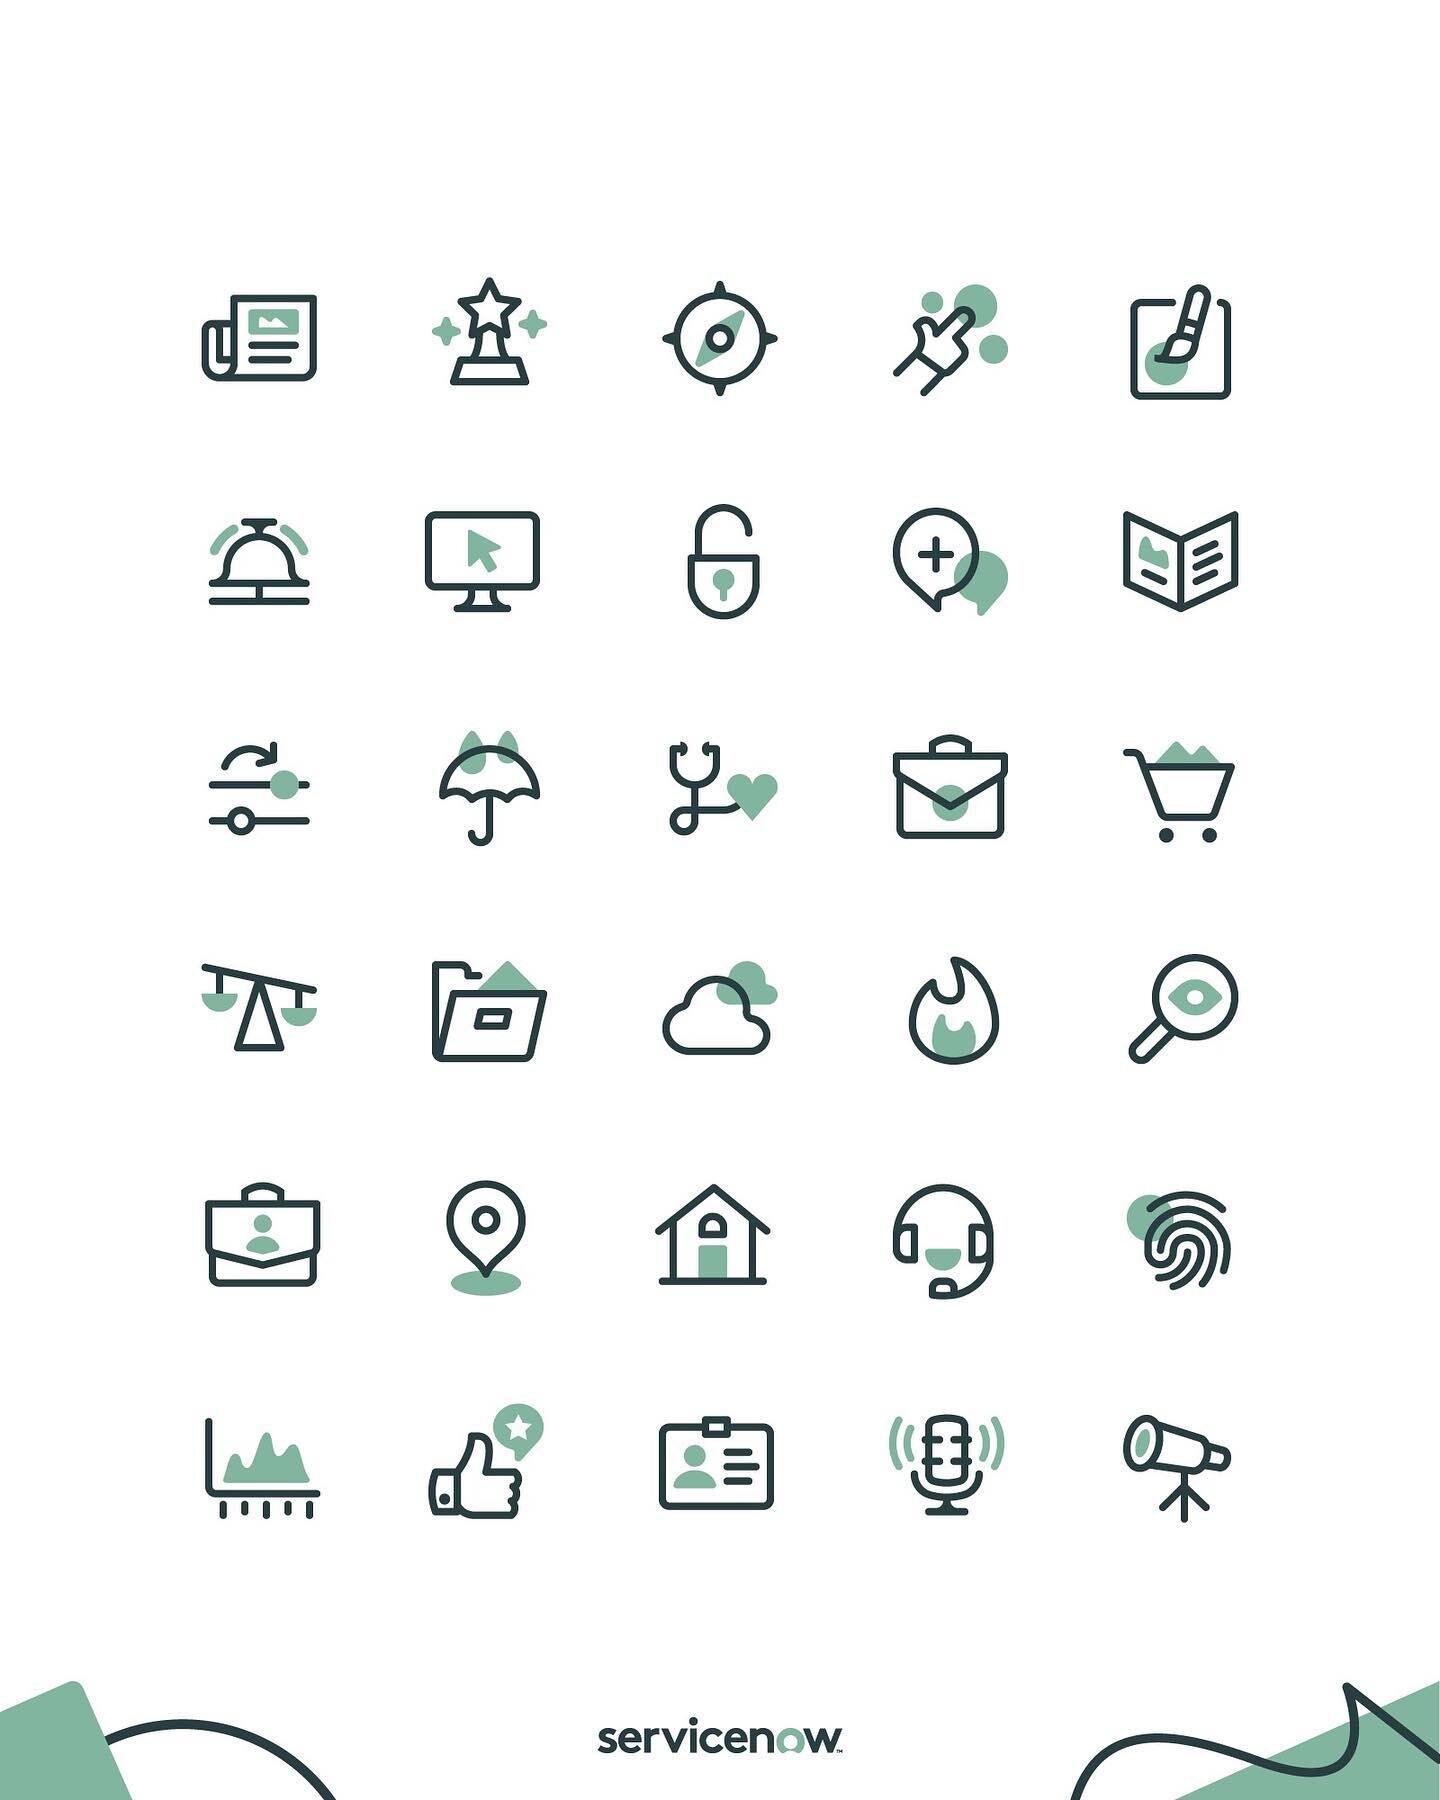 ServiceNow Iconography &mdash;
Which icon is your favorite?